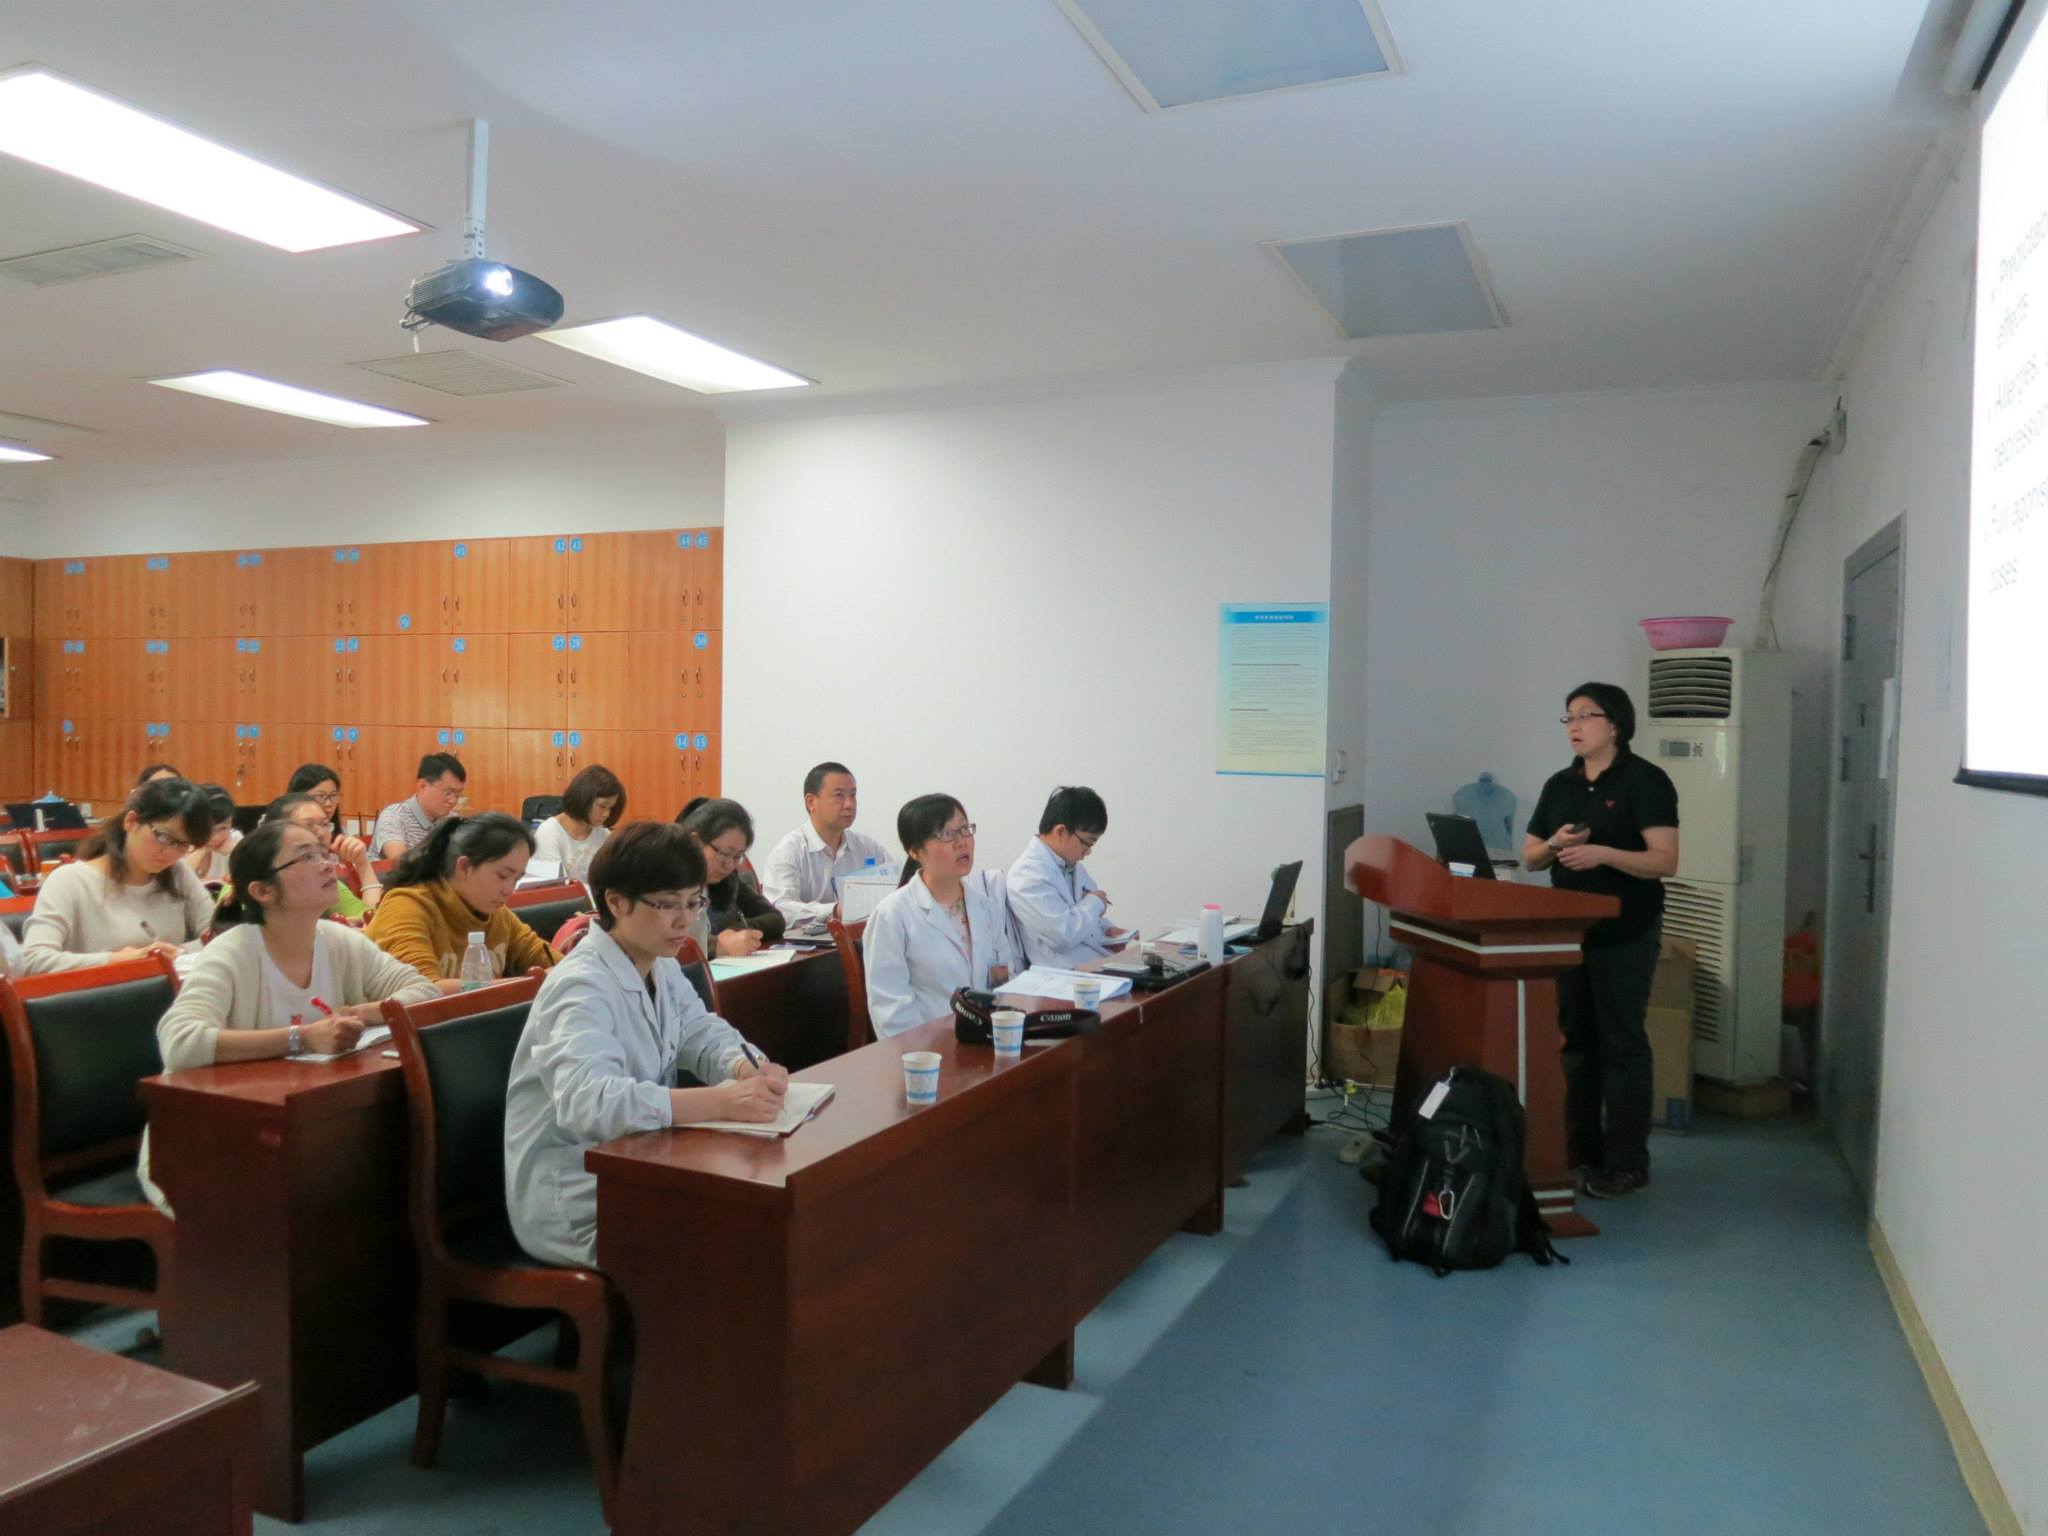 Hoan Linh Banh delivers a lecture to pharmacists in China